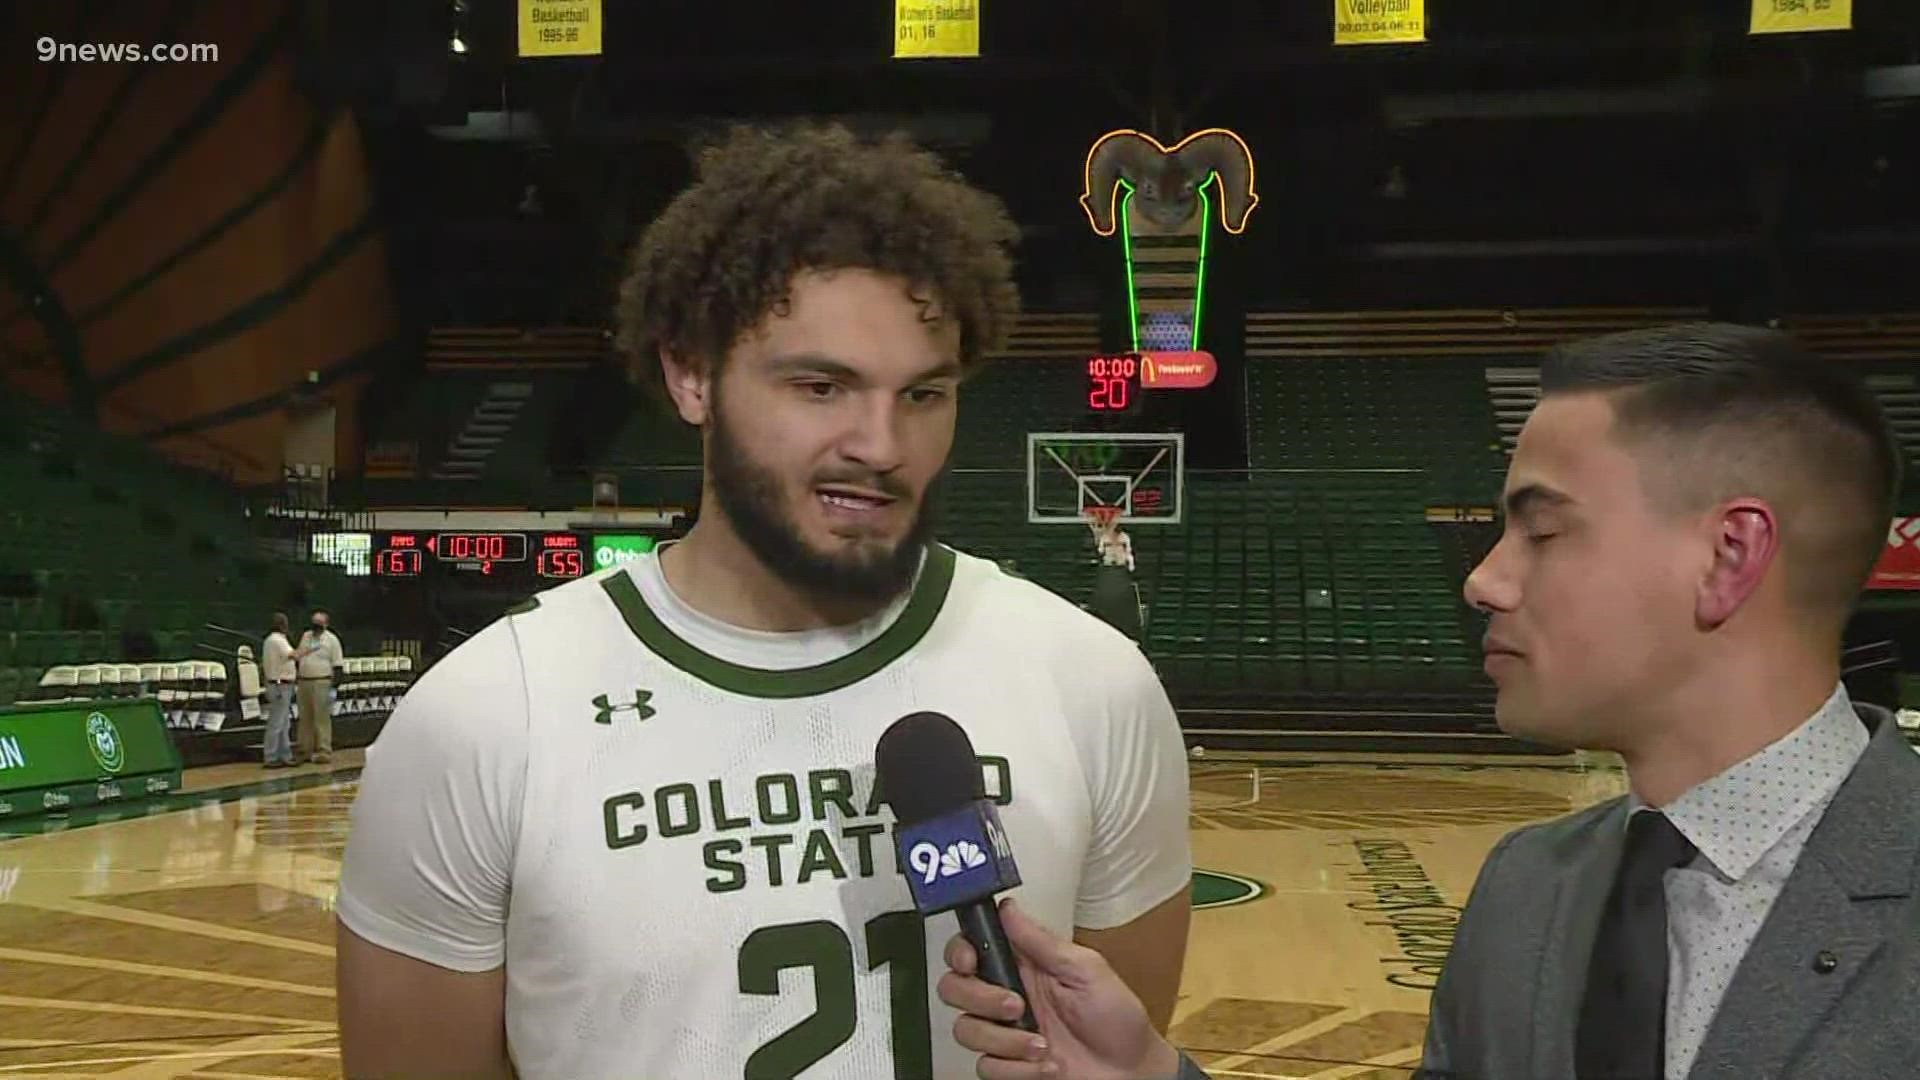 Colorado State defeated Wyoming 61-55 in Wednesday night's rematch at Moby Arena.